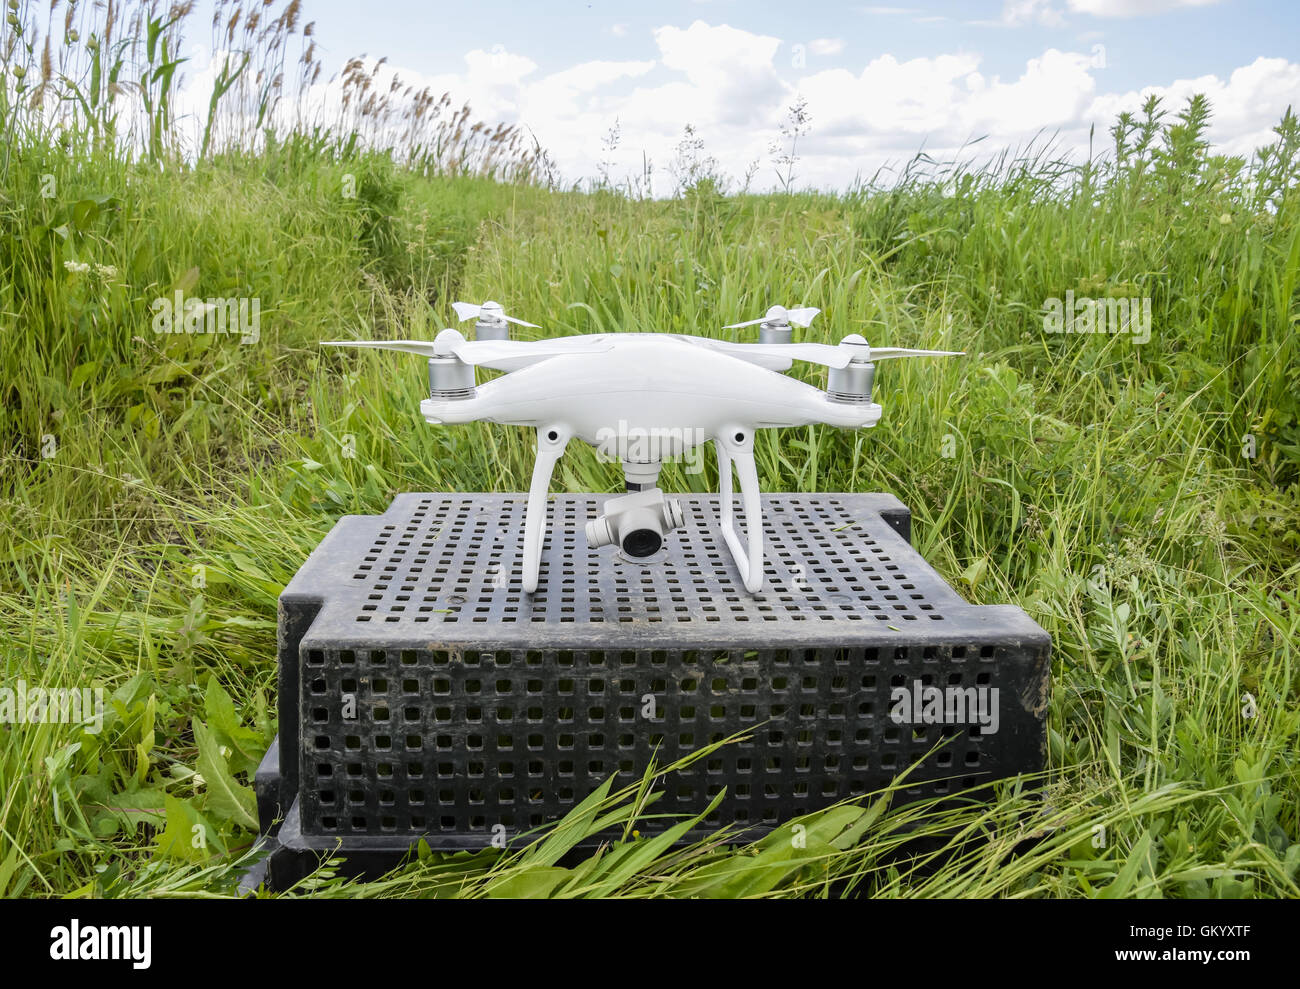 Quadrocopters on a plastic box in the grass. Preparation quadrocopter to fly. Stock Photo